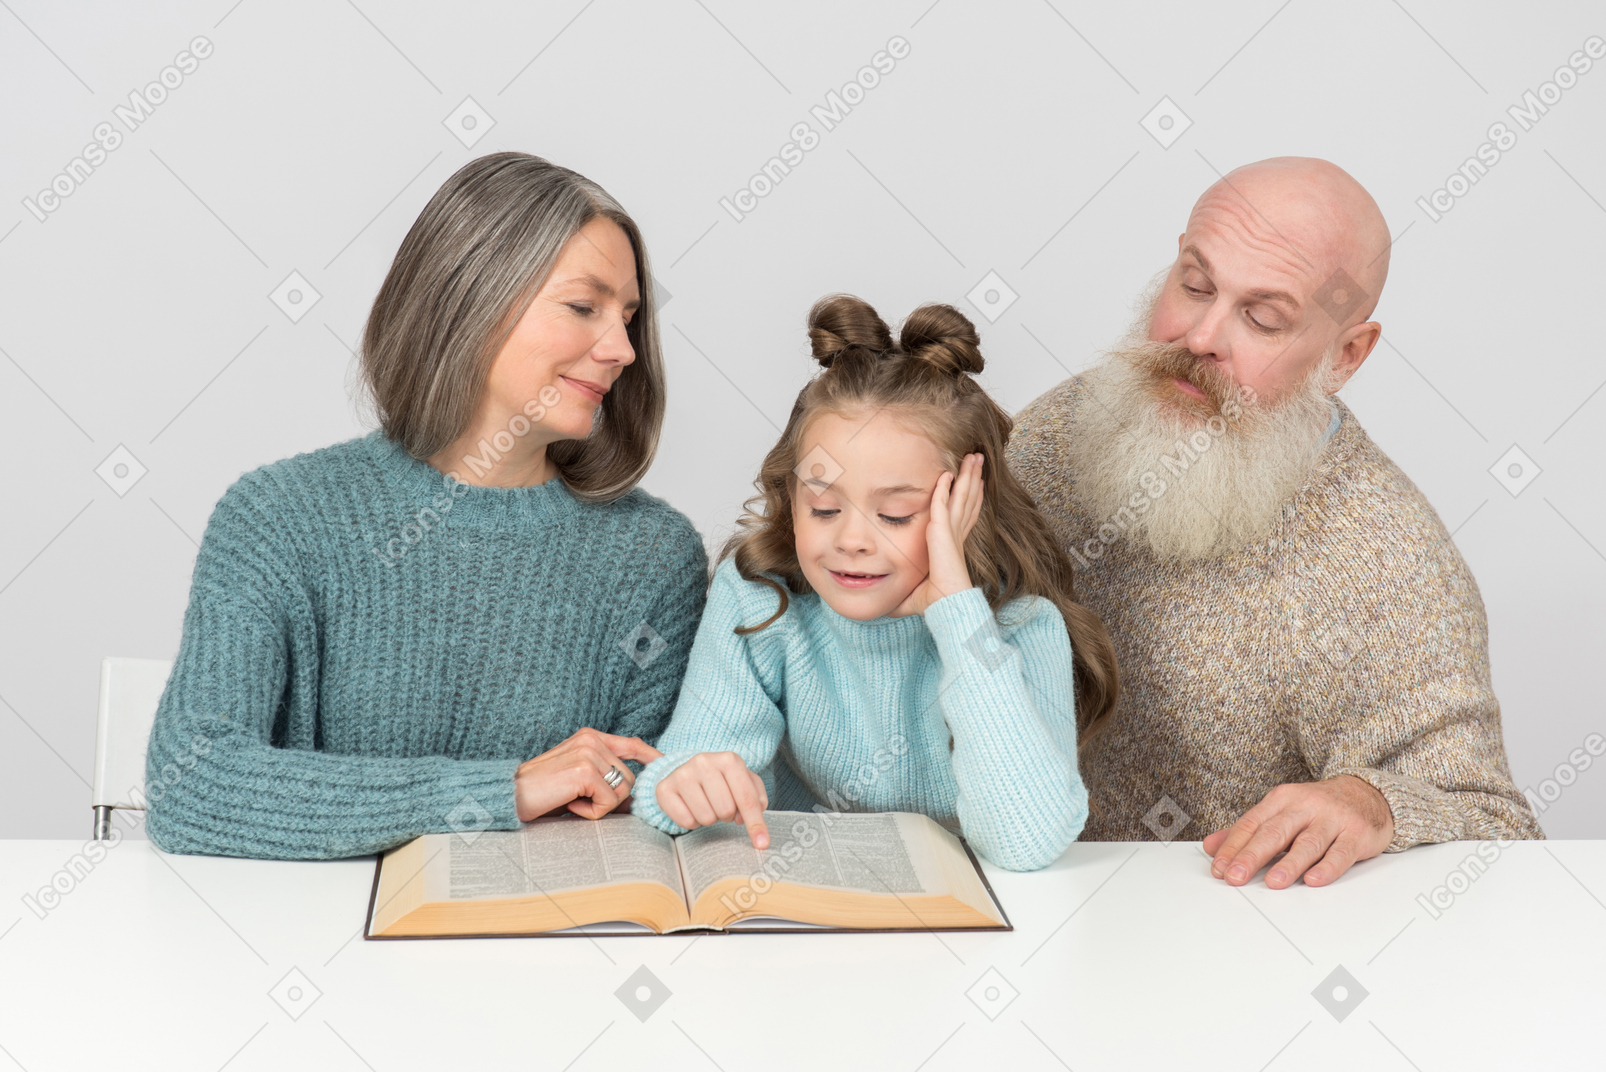 Getting new information together with grandparents